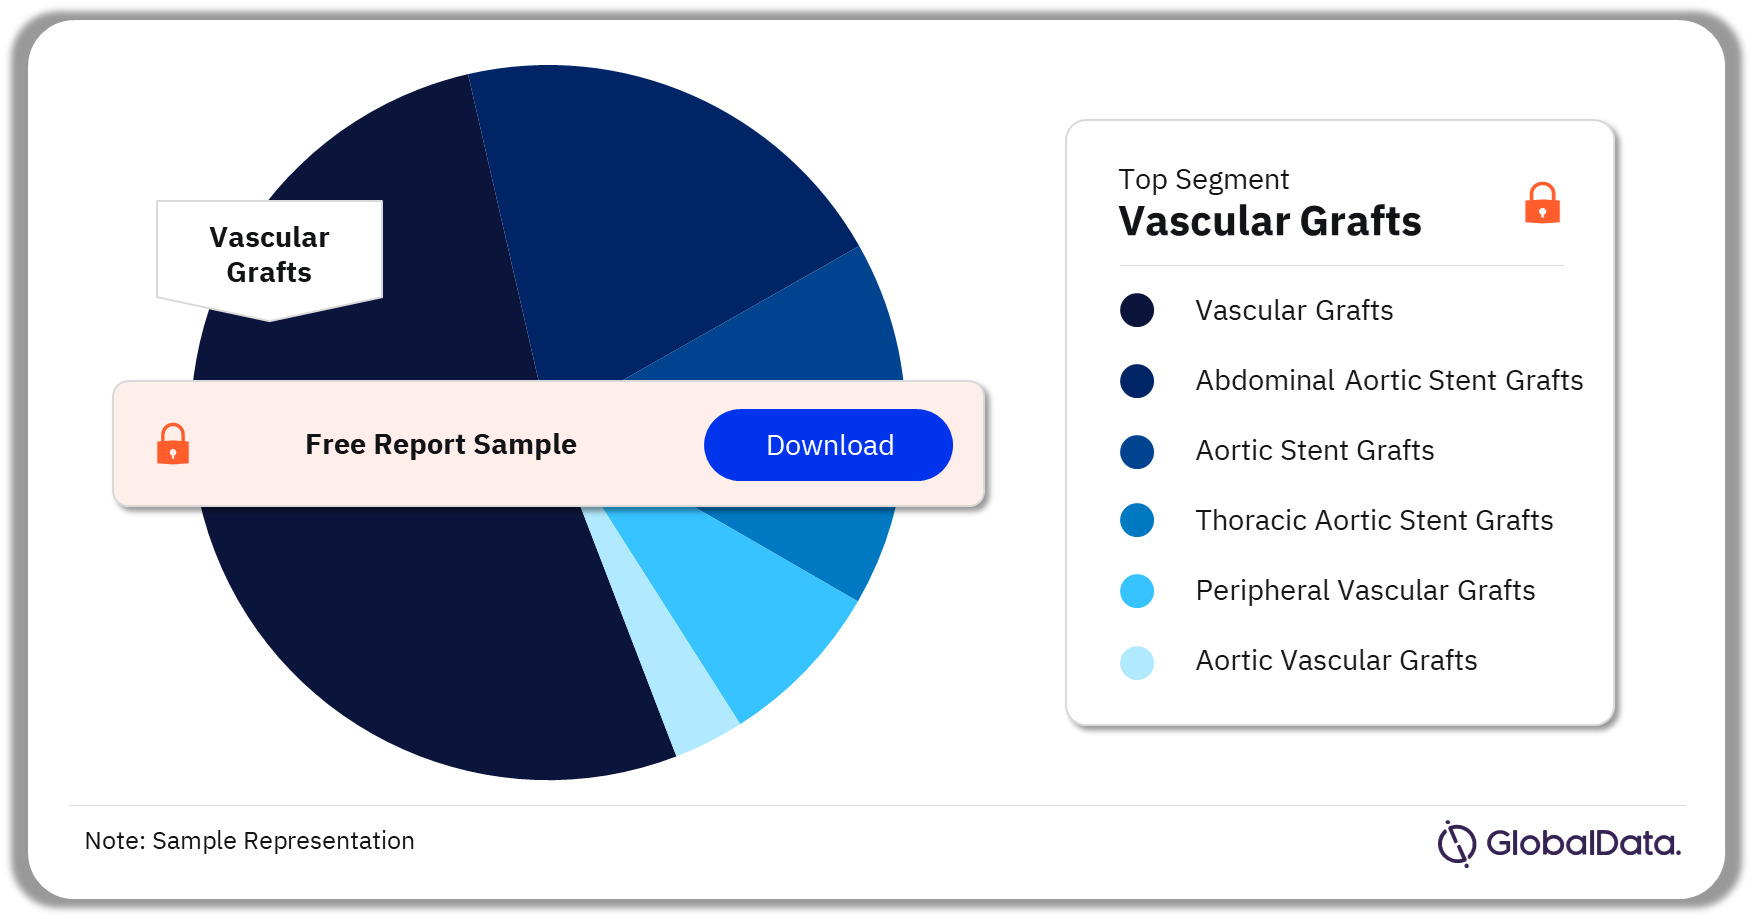 Aortic and Vascular Graft Devices Pipeline Market Analysis by Segments, 2023 (%)